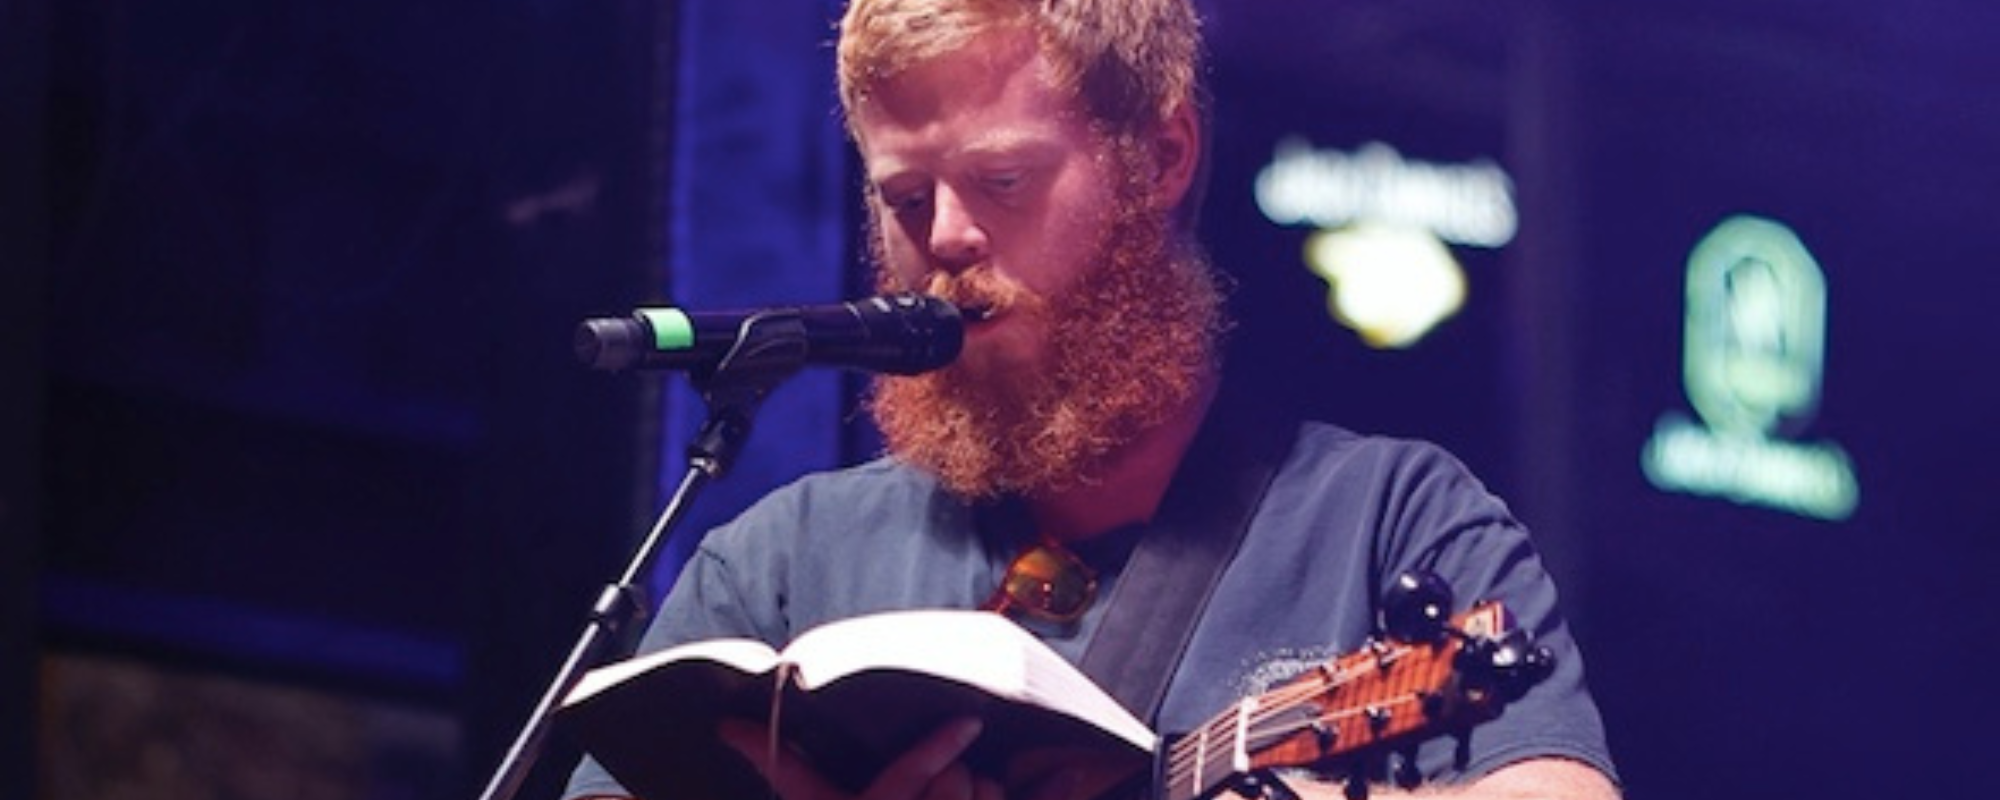 Oliver Anthony Starts Recent Concert By Reading Bible Passage About Humility